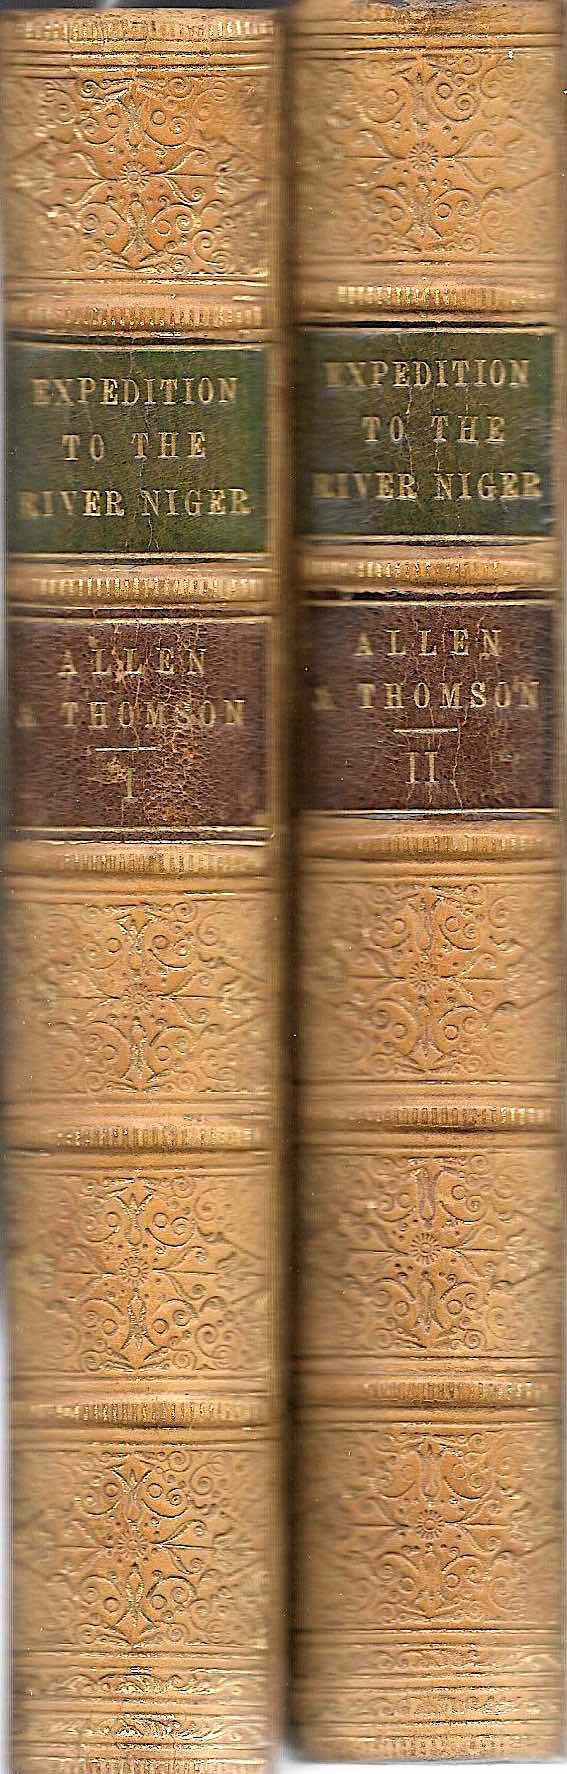 ALLEN, WILLIAM & THOMSON, T.R.H.: -  A Narrative of the Expedition sent by Her Majesty's Government to the River Niger, in 1841, under the of Command by Captain H.D. Trotter. Two volumes. London, Richard Bentley, 1848.